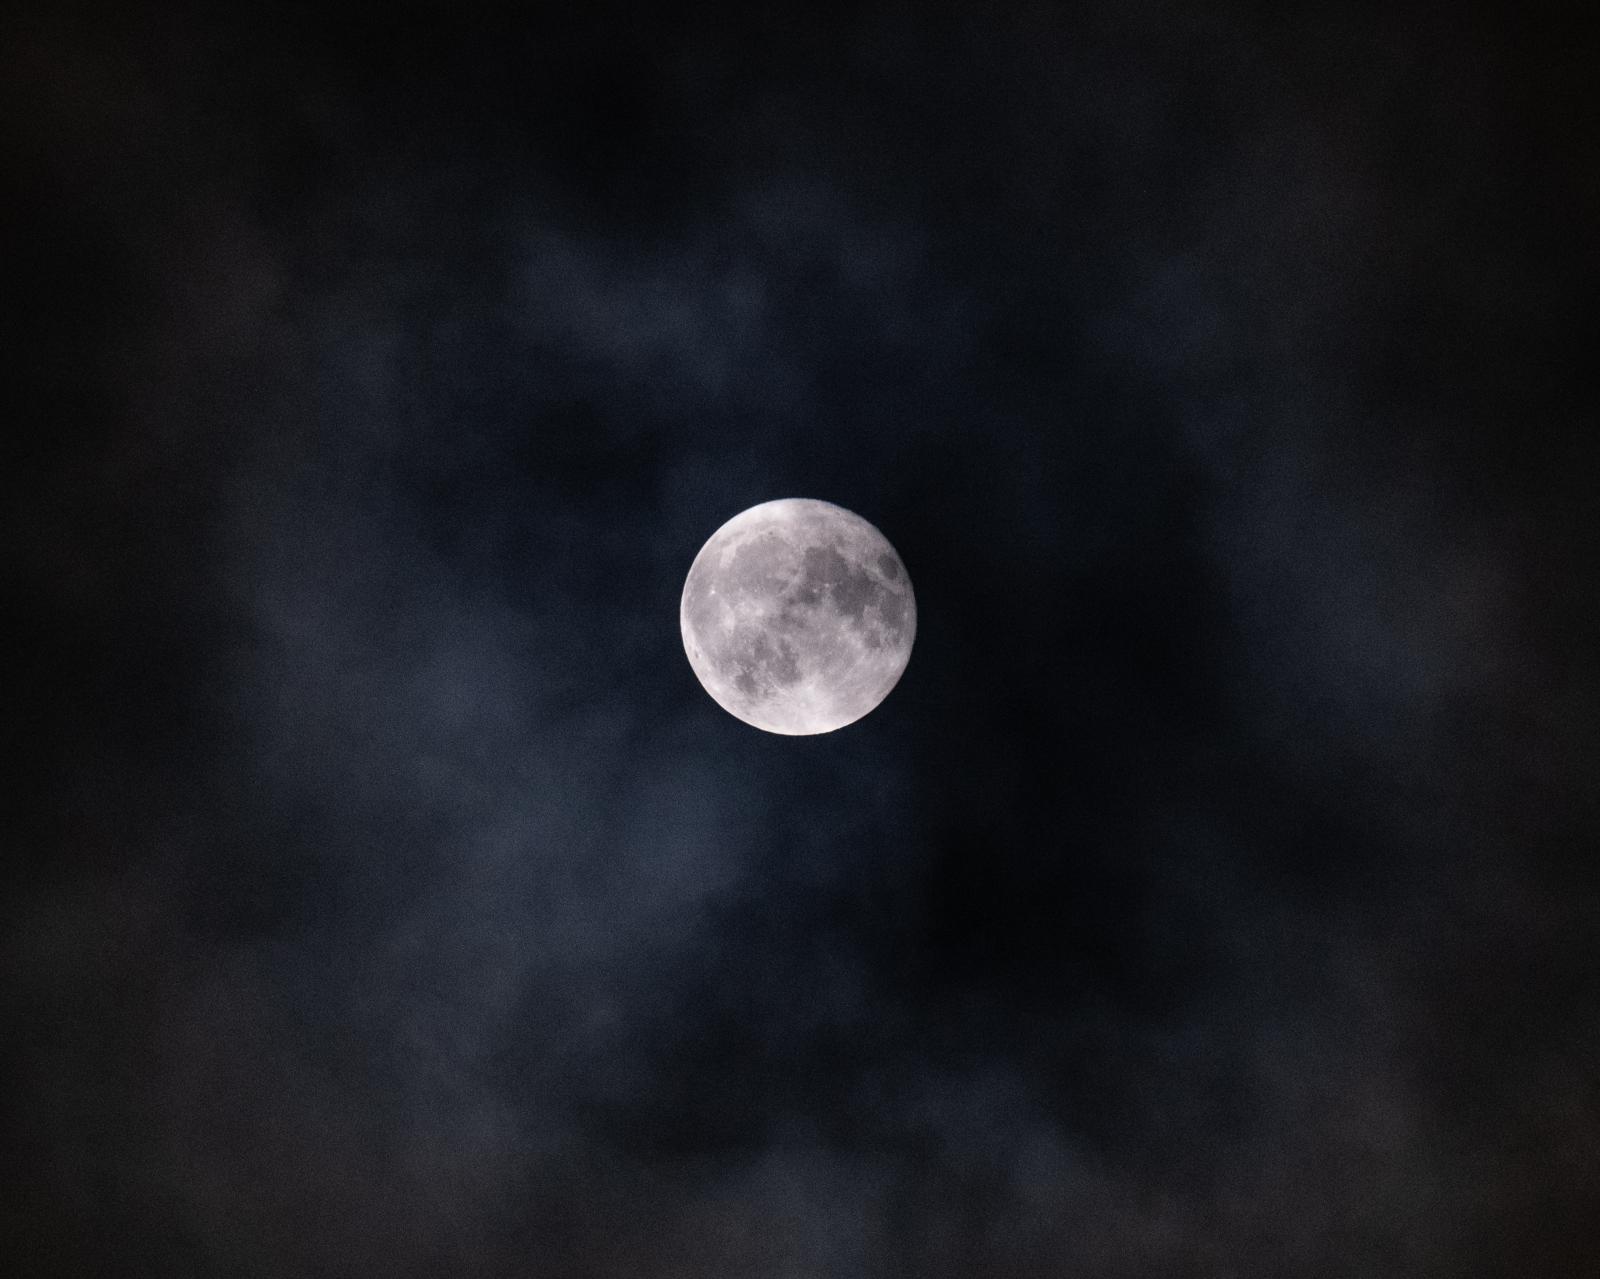 Blue Full Moon | Buy this image